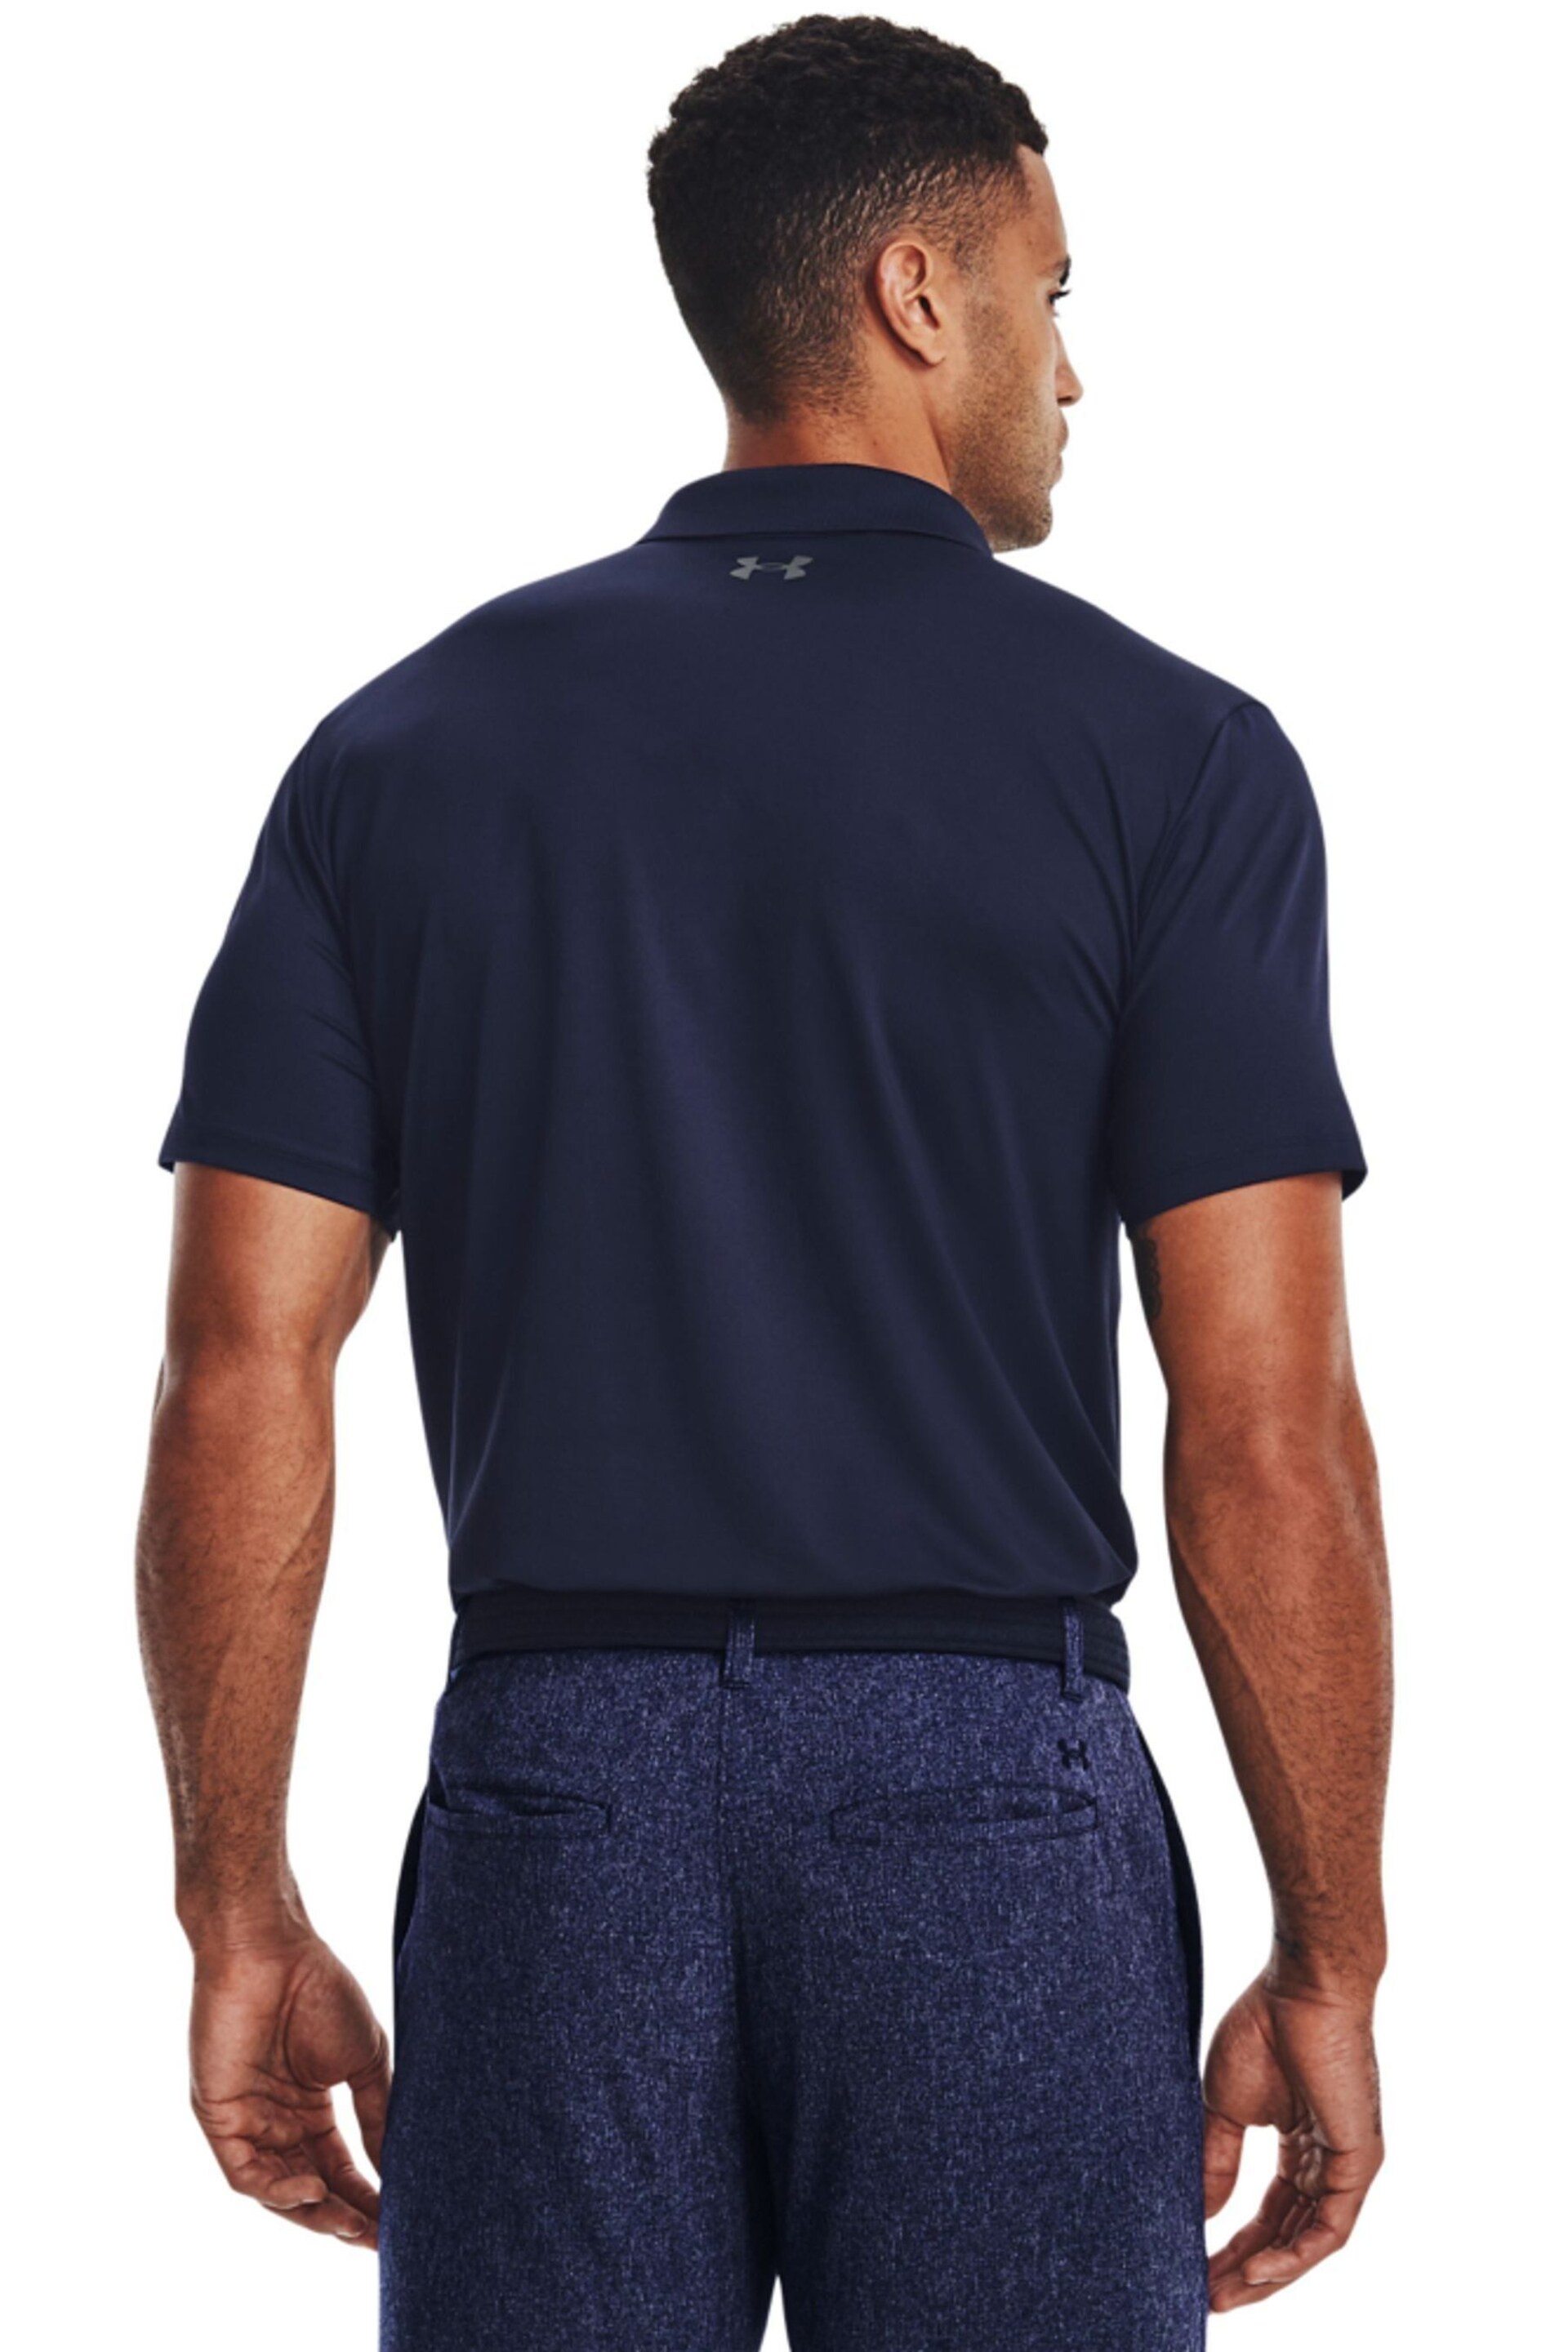 Under Armour Navy Blue/Grey Golf Performance 3.0 Polo Shirt - Image 2 of 5